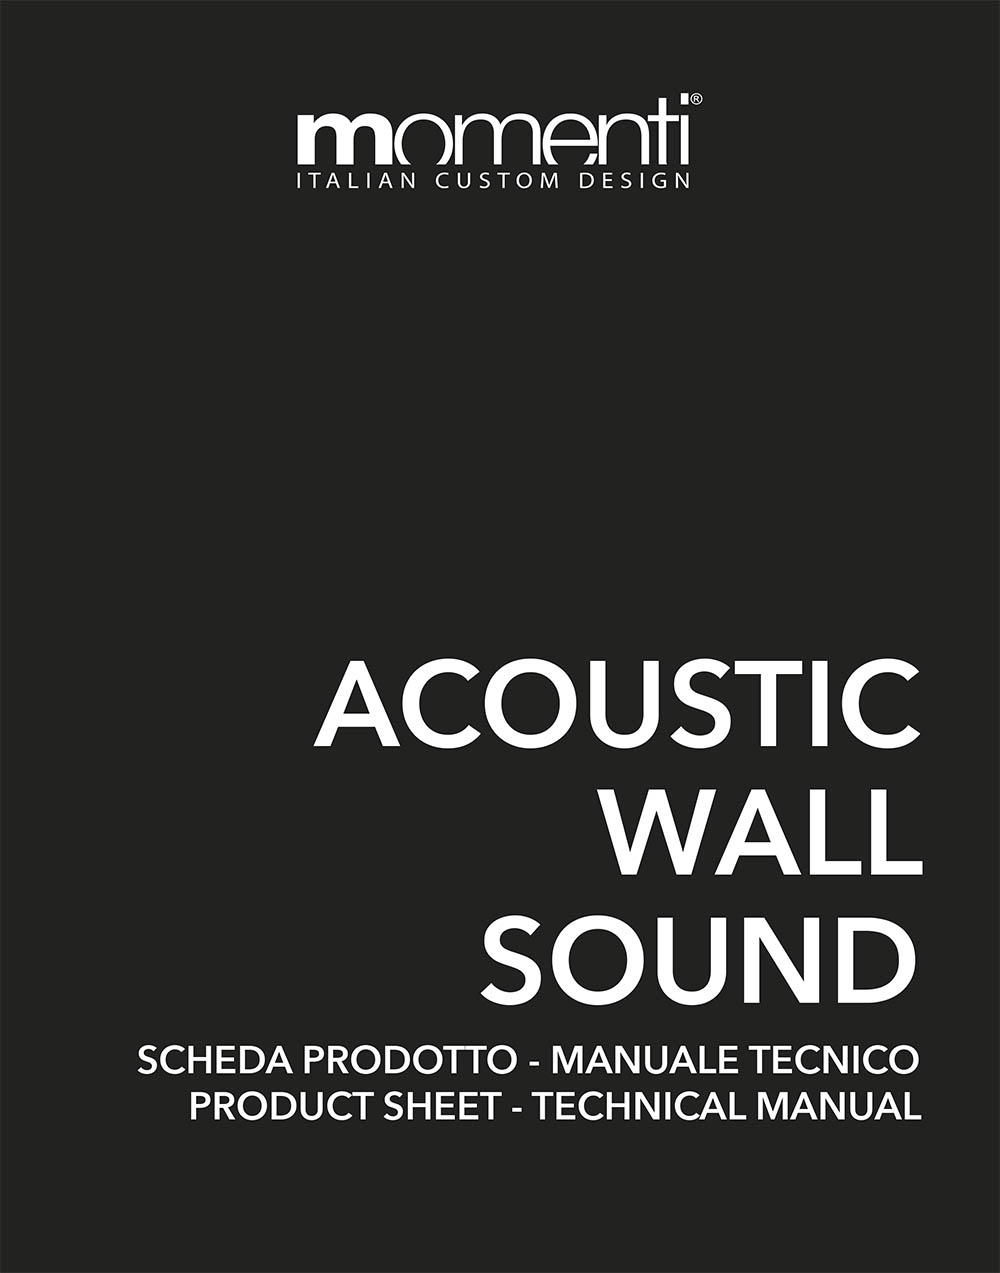 Acoustic Wall Sound - Momenti